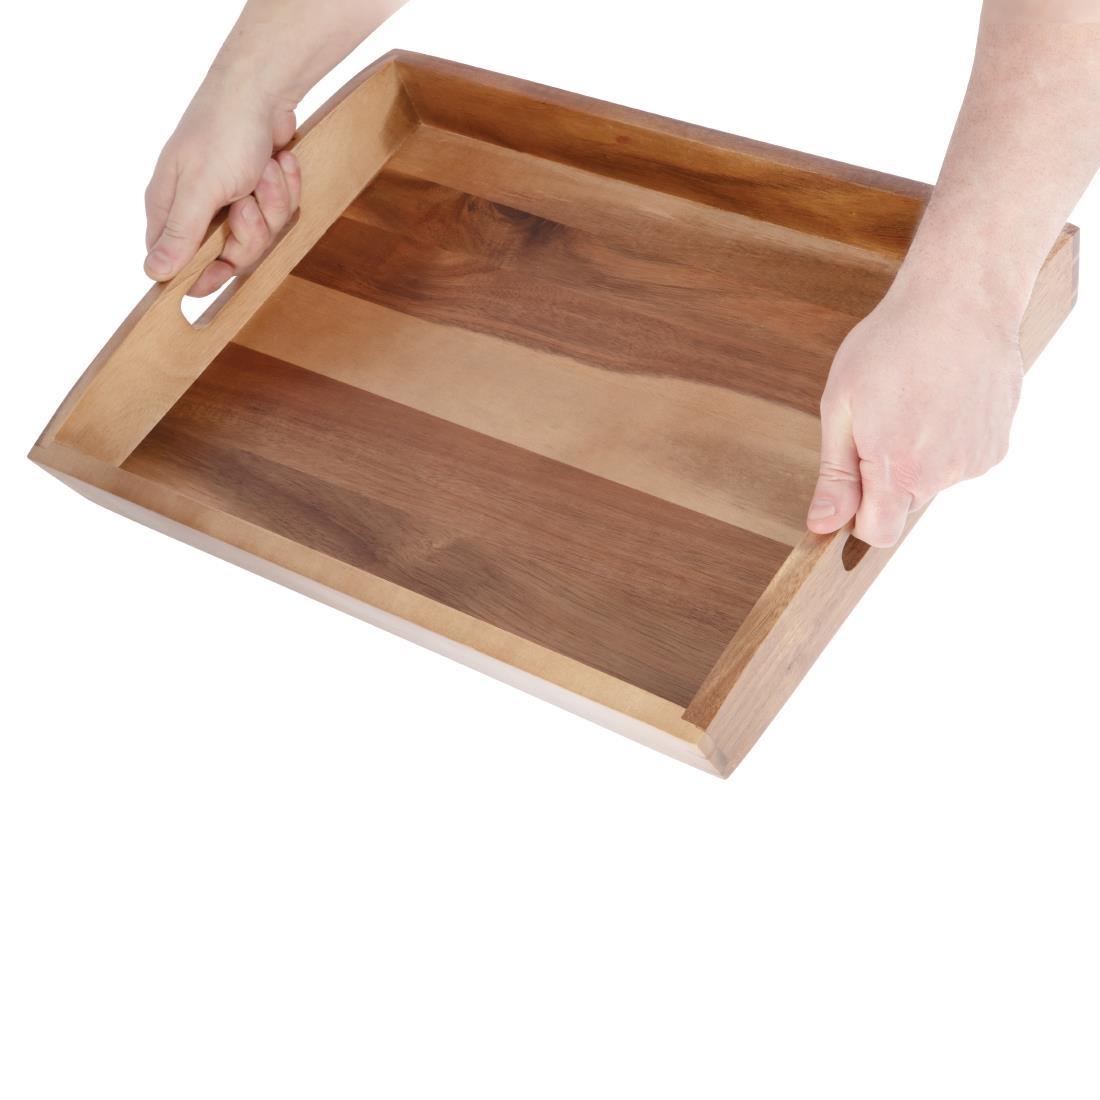 Olympia Large Acacia Wood Butler Tray 510mm - GM266  - 5